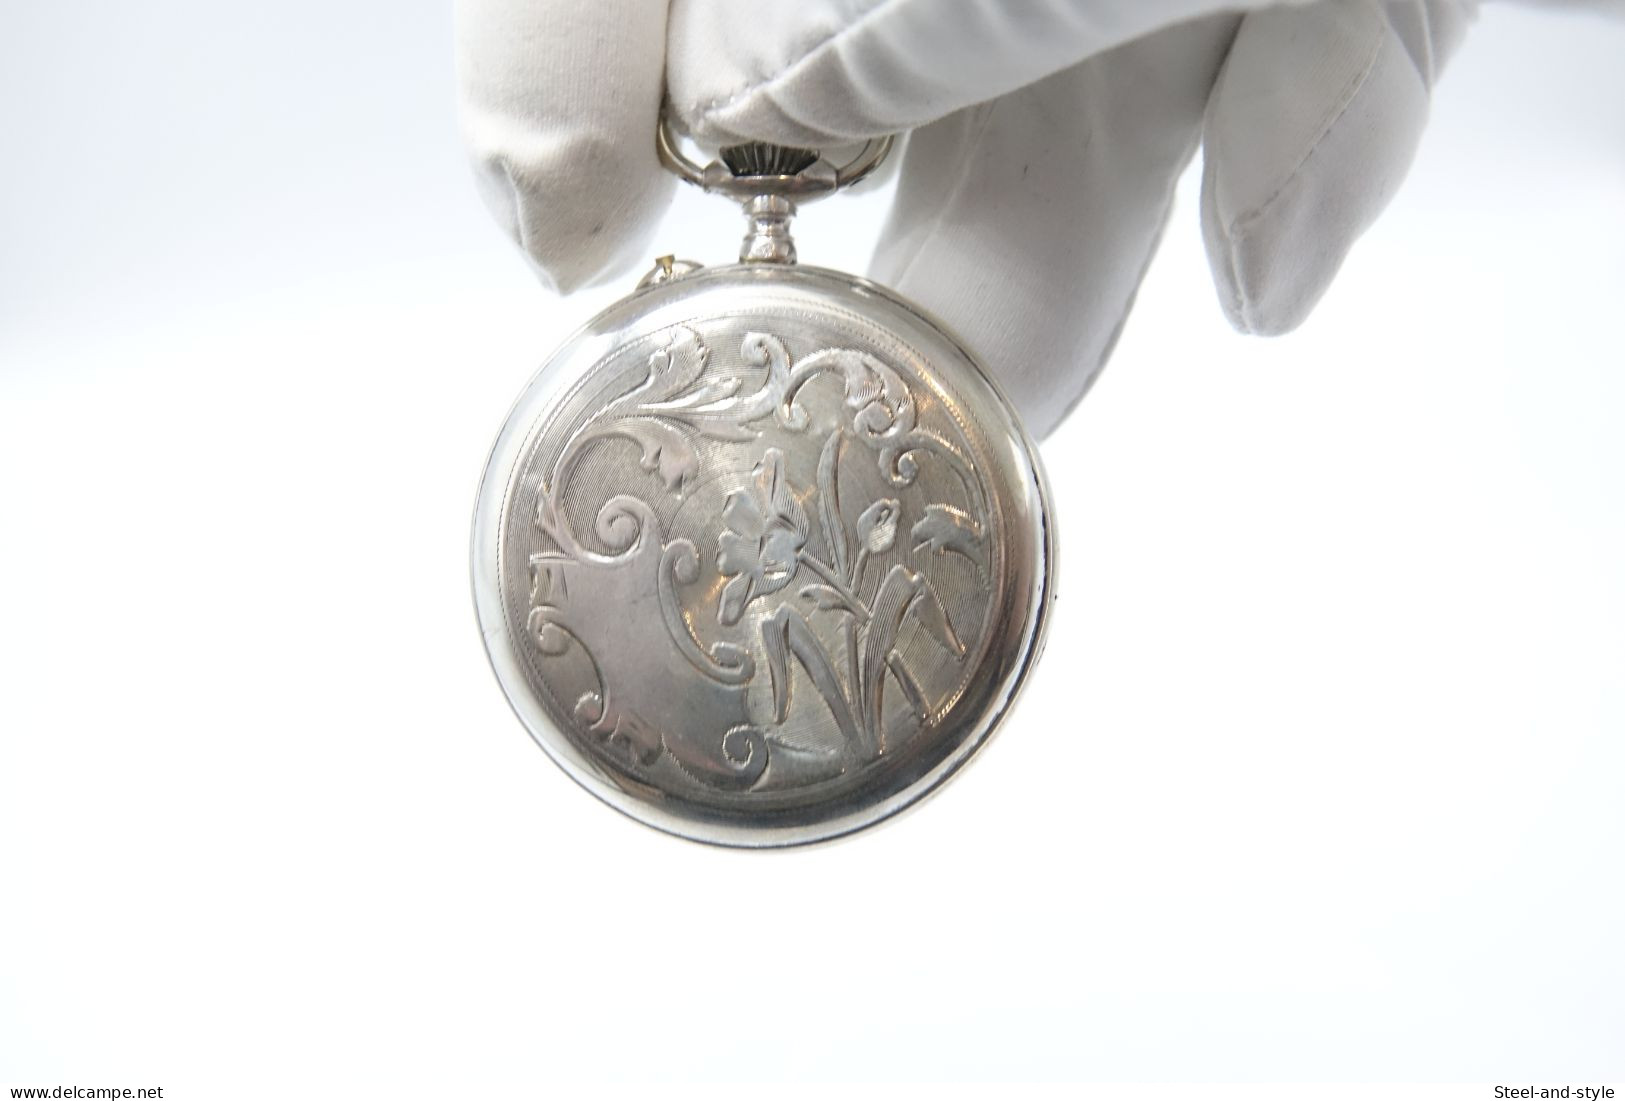 Watches : POCKET WATCH SOLID SILVER CR & CIE 24 HOURS Wide Dial Open Face 1880-900's - Original - Running - Relojes De Bolsillo